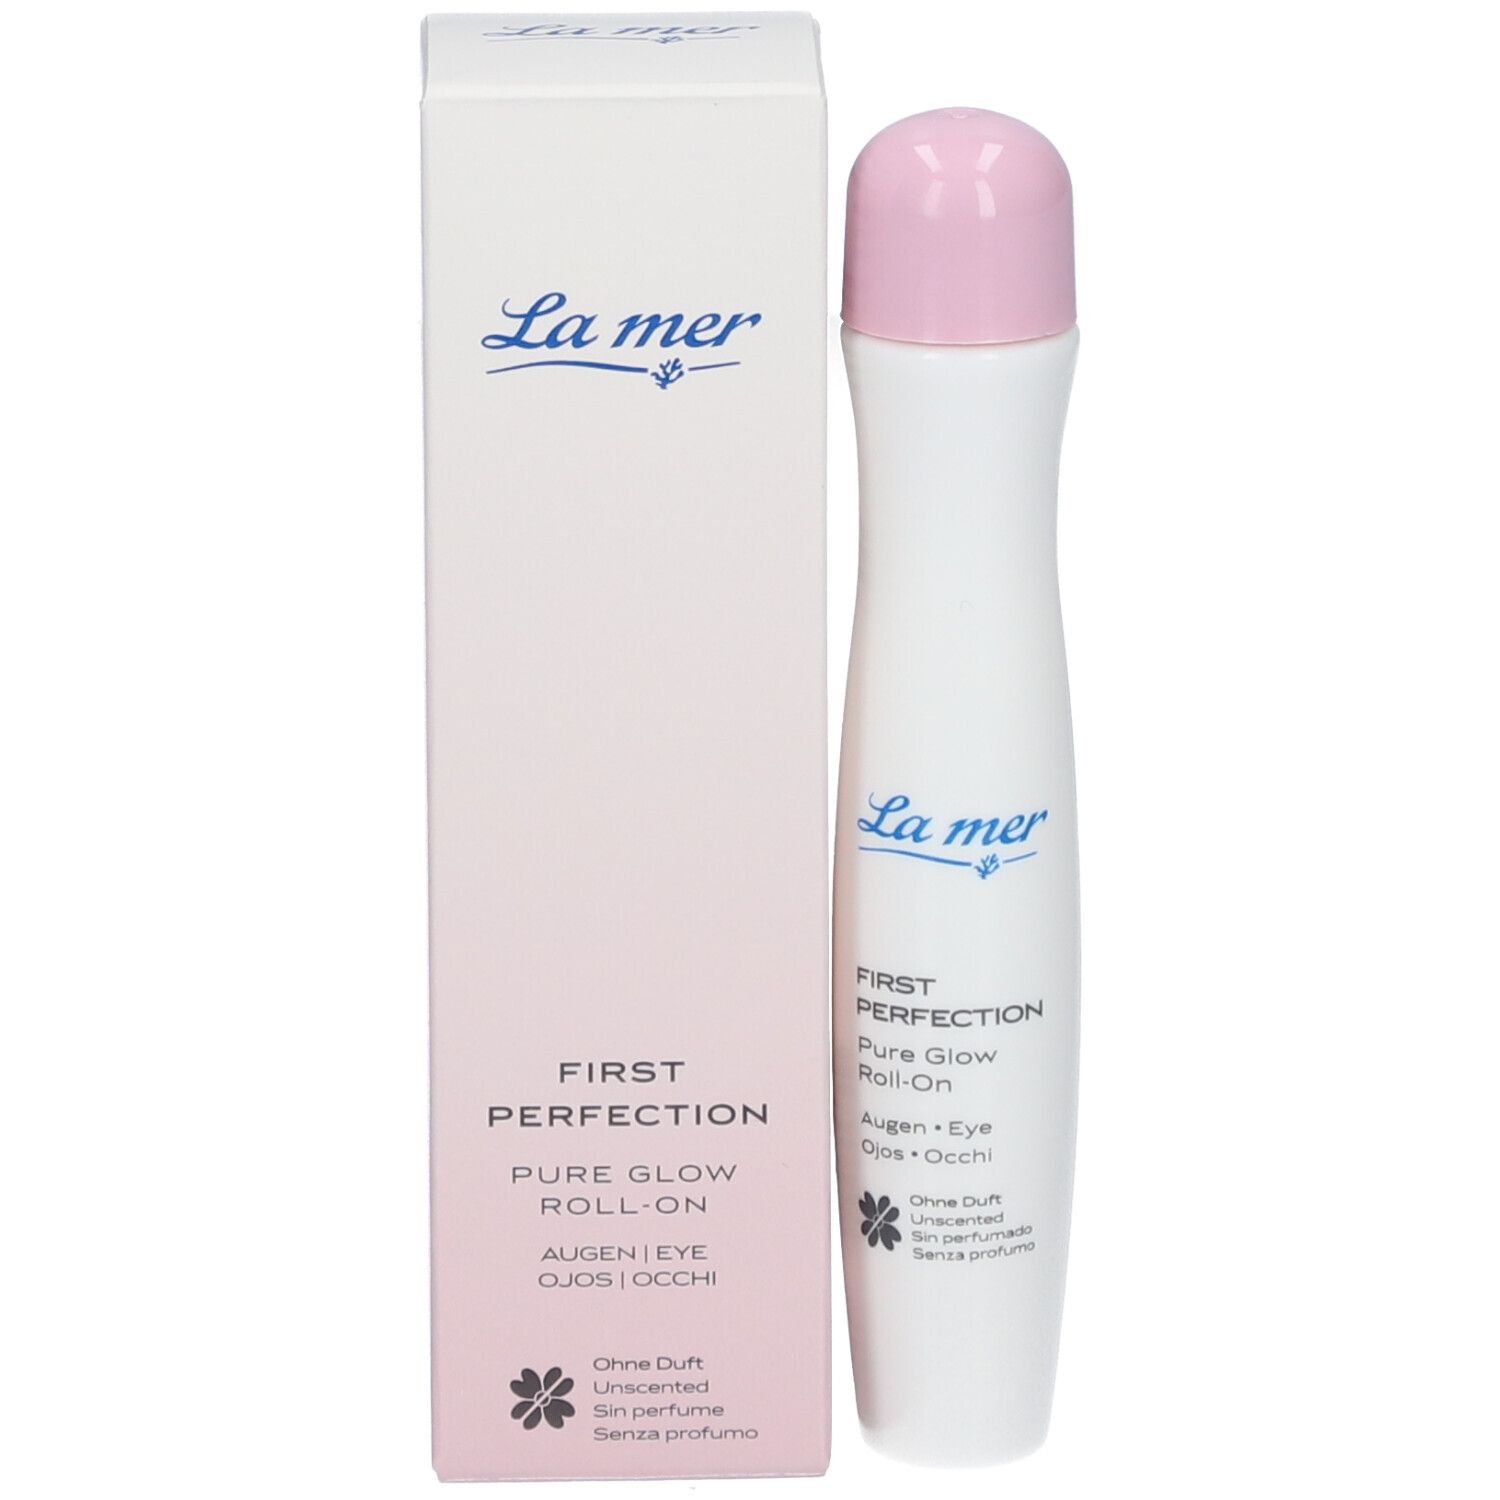 La mer First Perfection Pure Glow Augen Roll-On